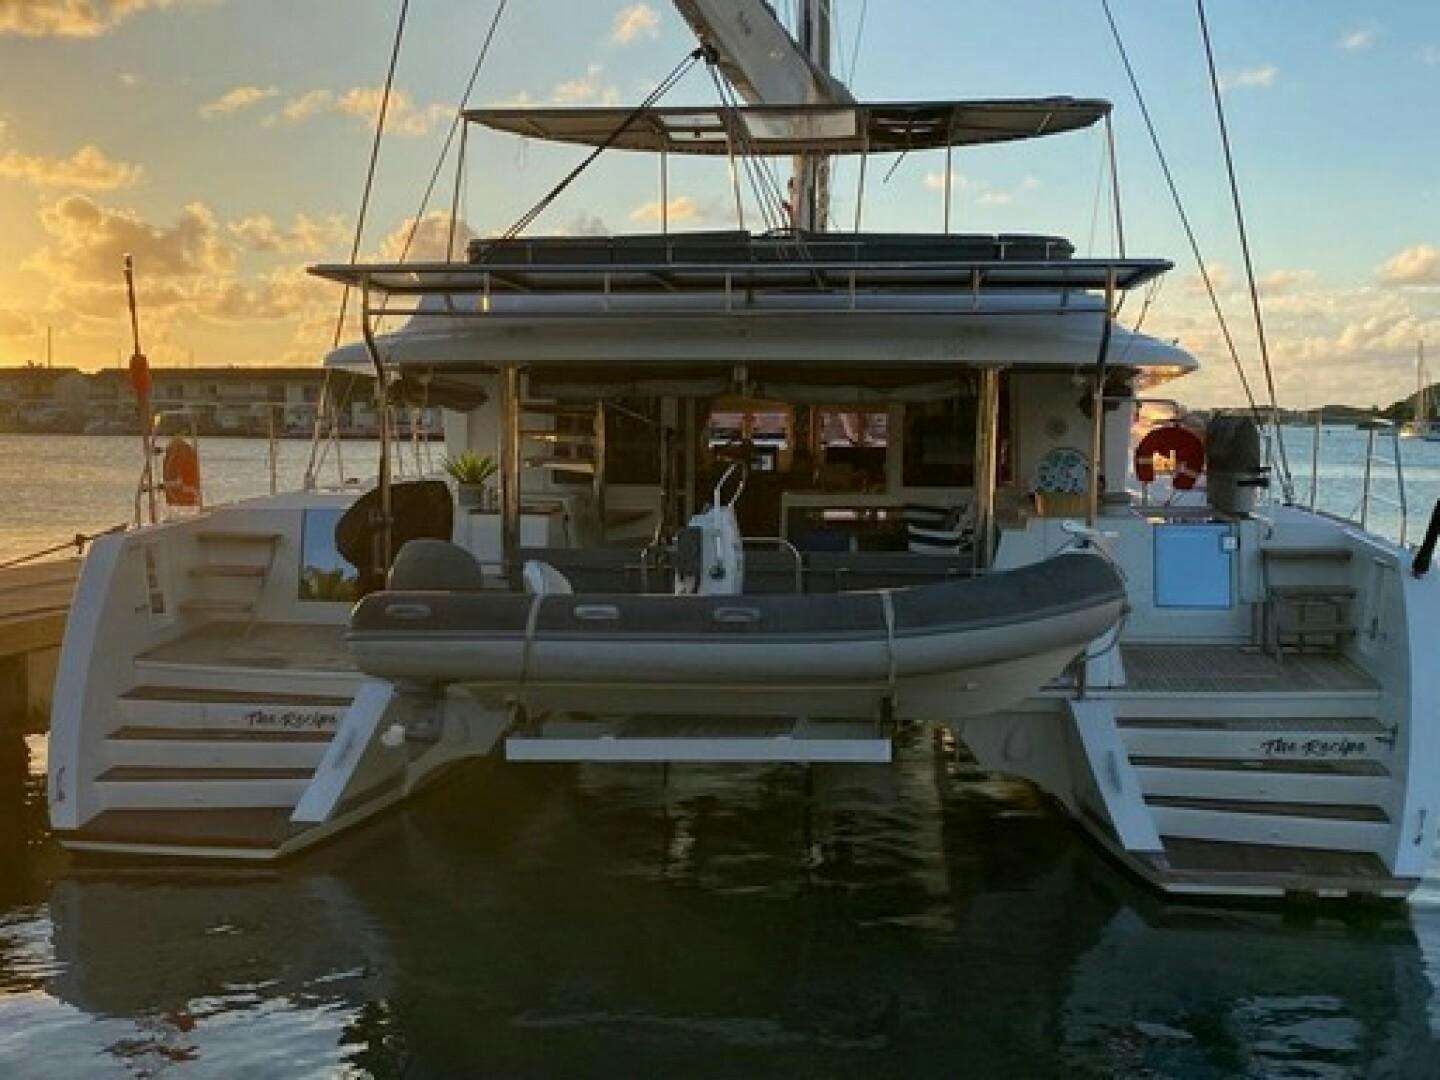 Recipe
Yacht for Sale